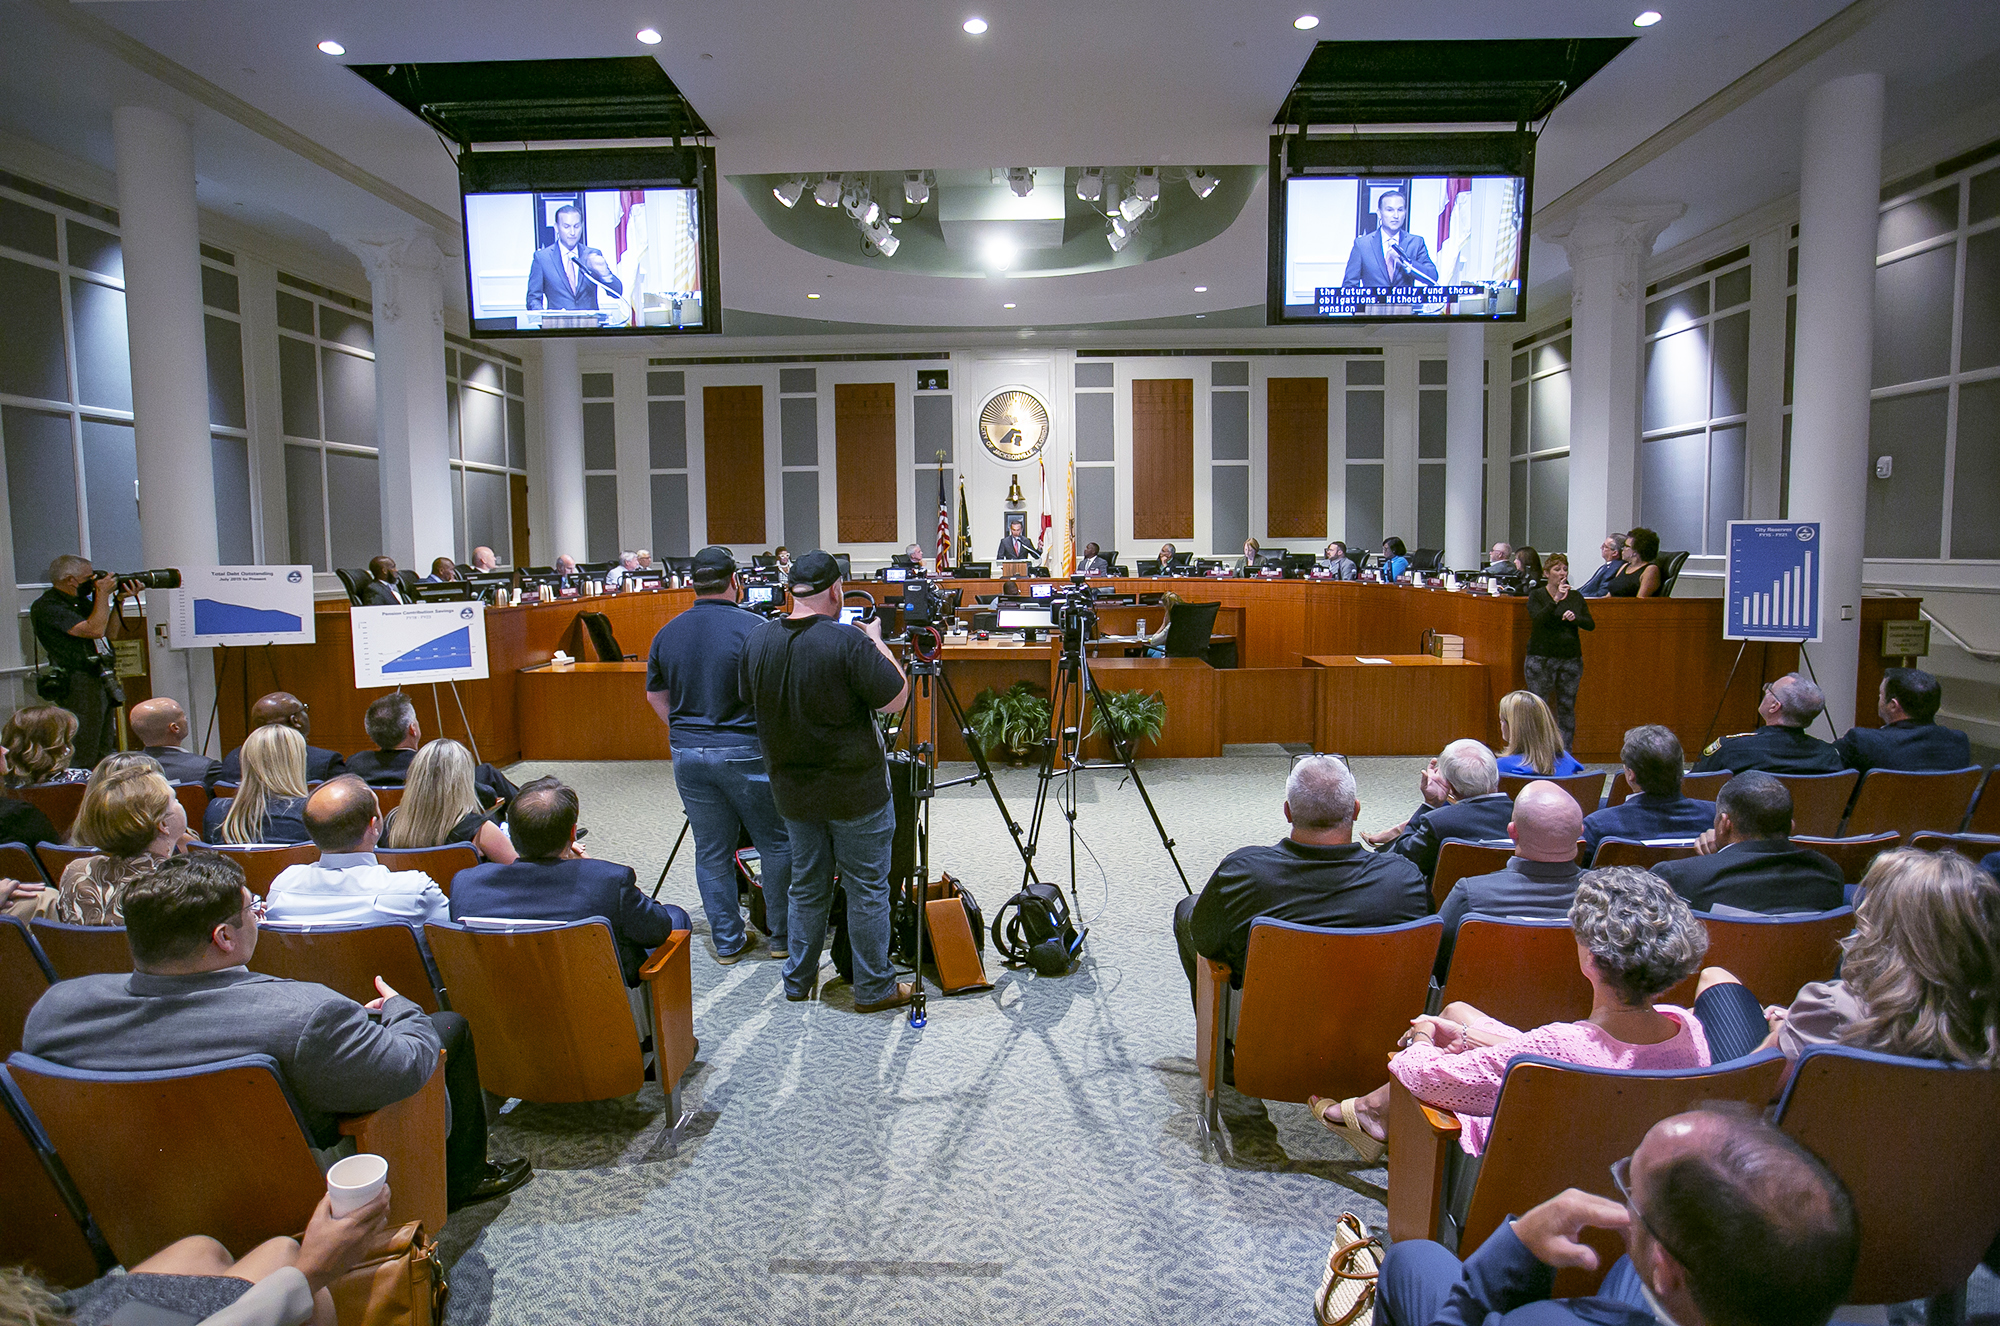 Curry speaks during a special session of City Council on July 21 at City Hall. (City of Jacksonville photo)